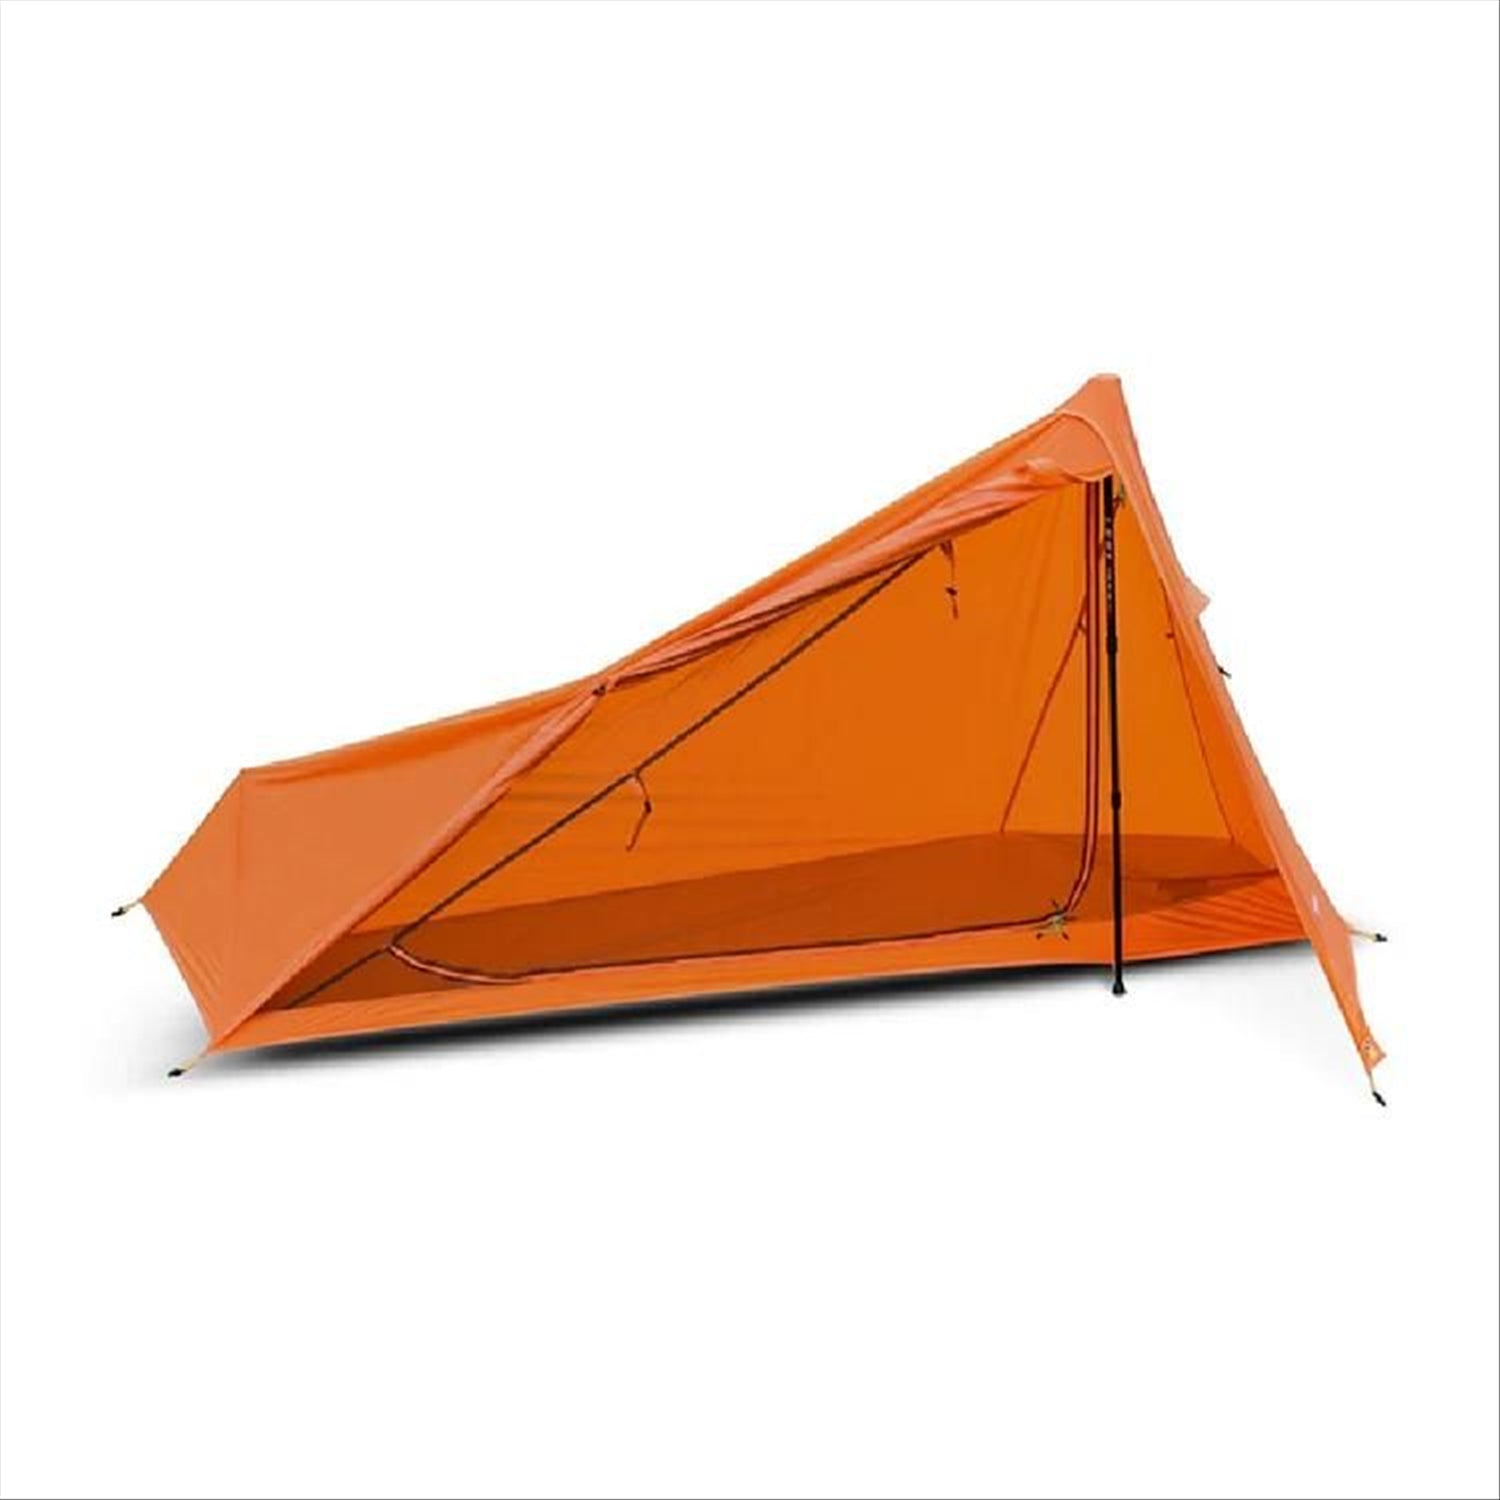 Intents Intents Outdoors Ultrapack SW - Nylon 1 Person Hiking Tent, 710g Single Wall